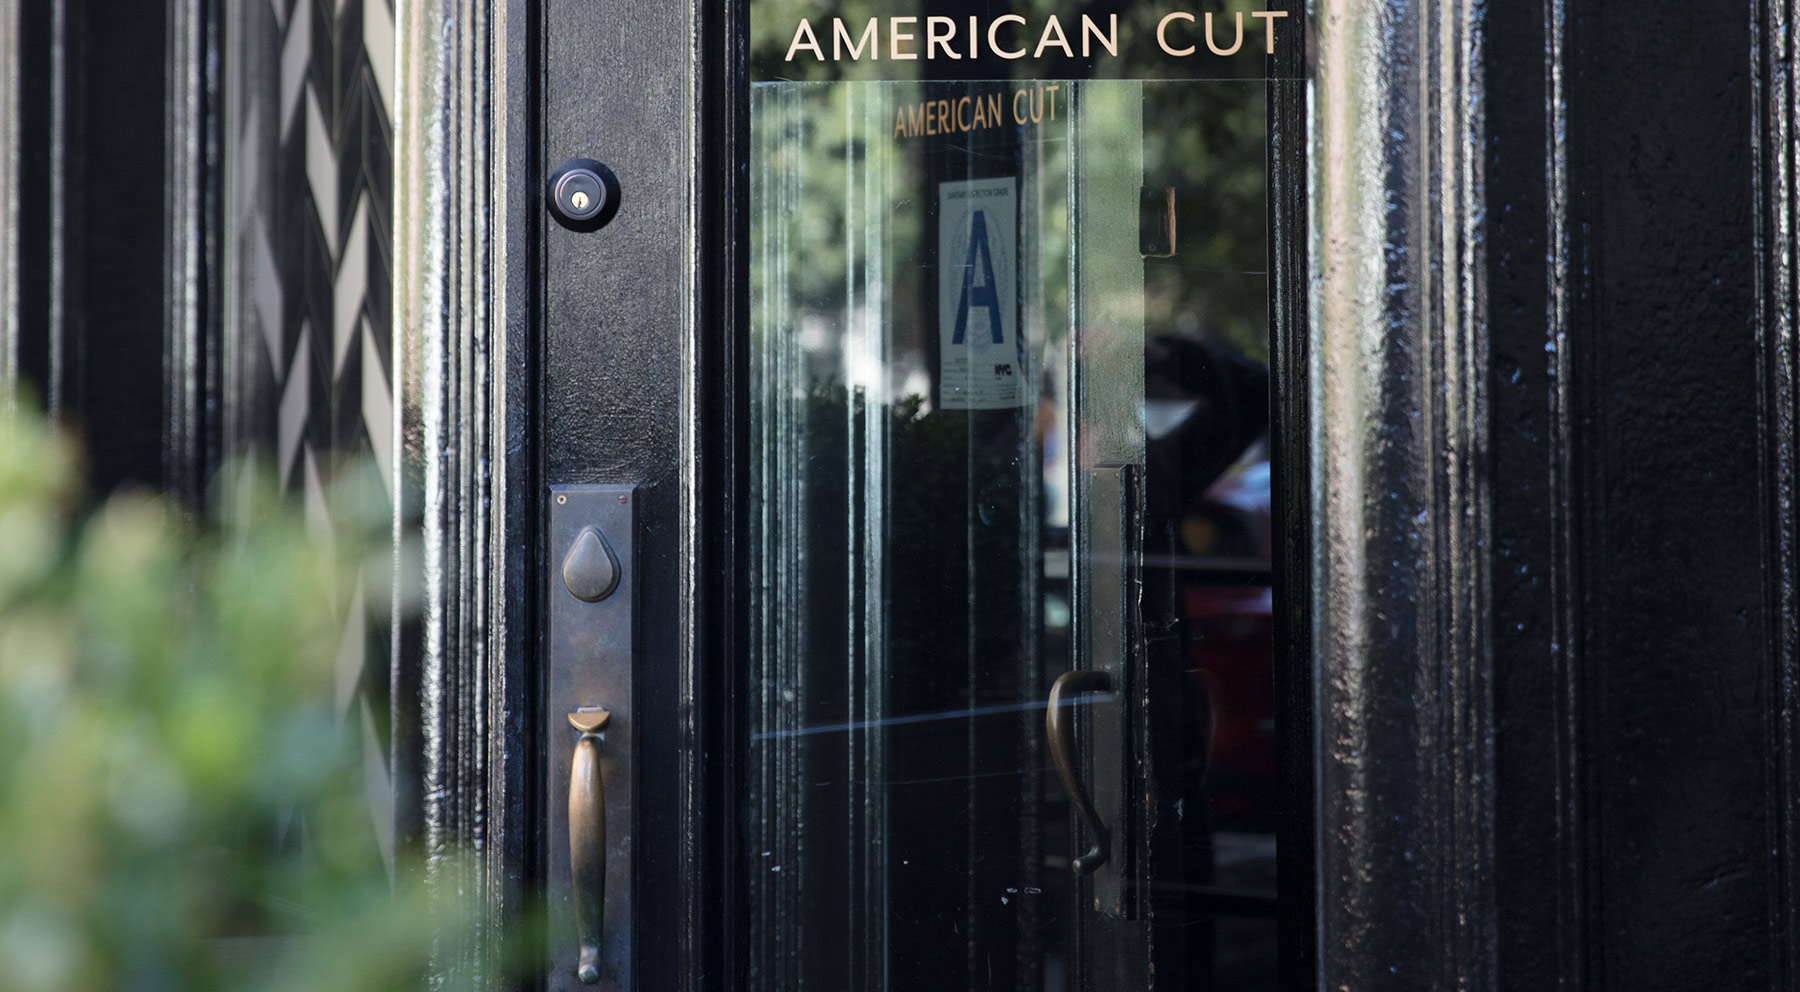 American Cut remembers and revitalizes the classic American steakhouse